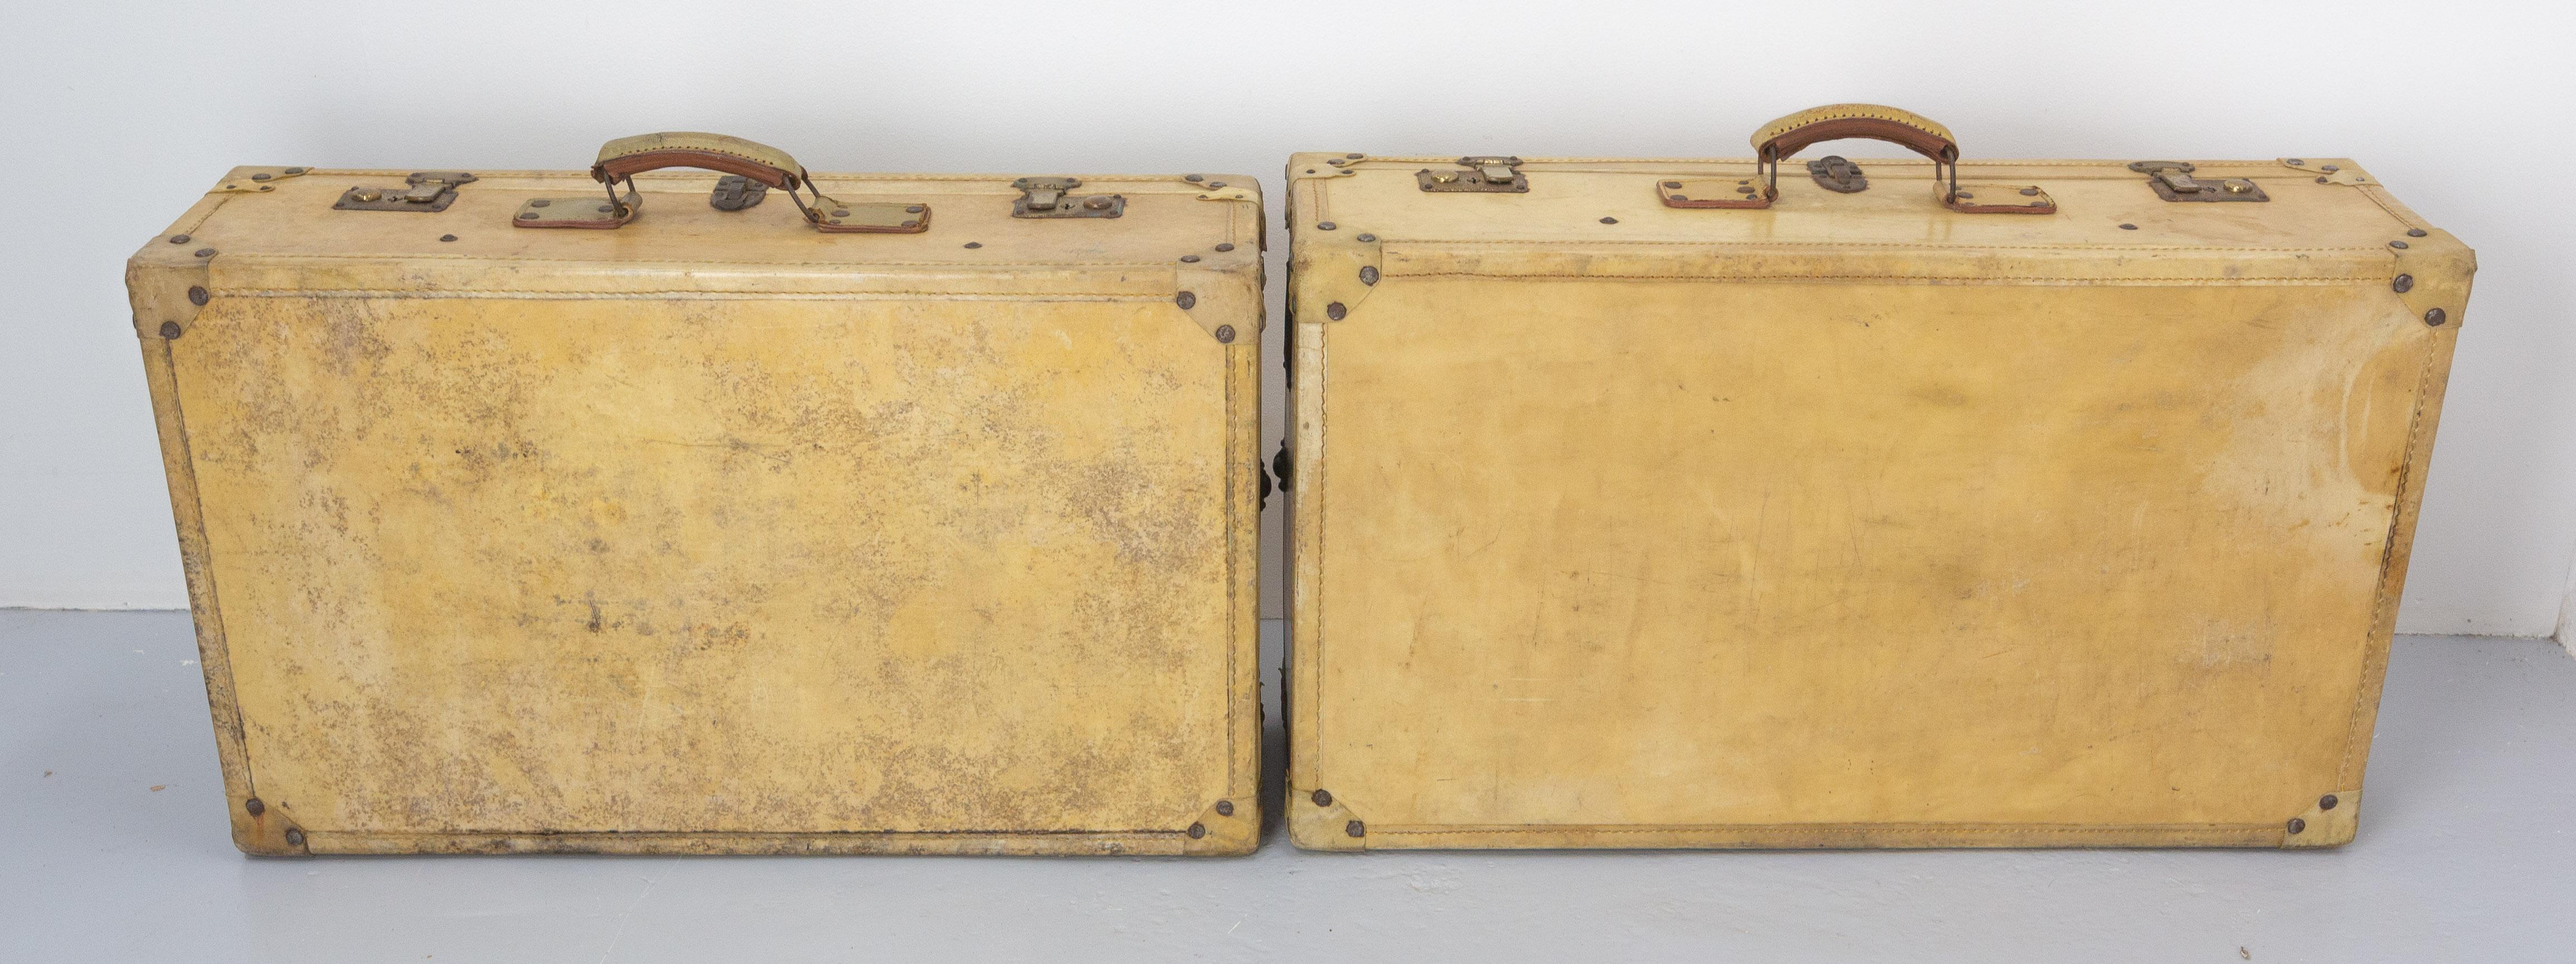 French Pair of Parchment Suit Cases Trunks, circa 1930 For Sale 3